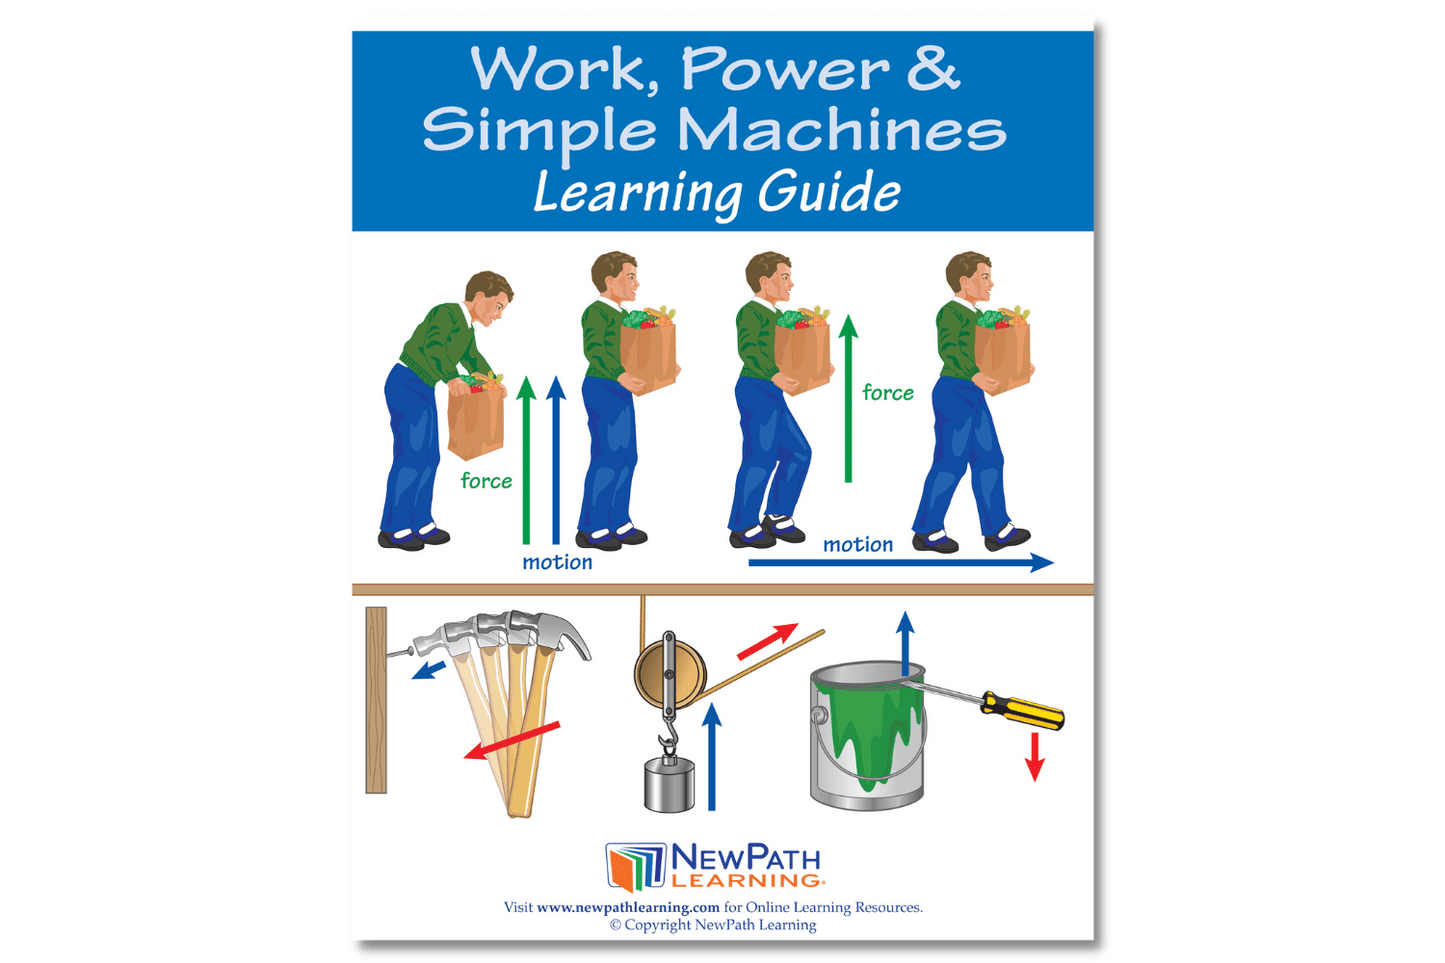 Arbor Scientific Work, Power & Simple Machines Learning Guide